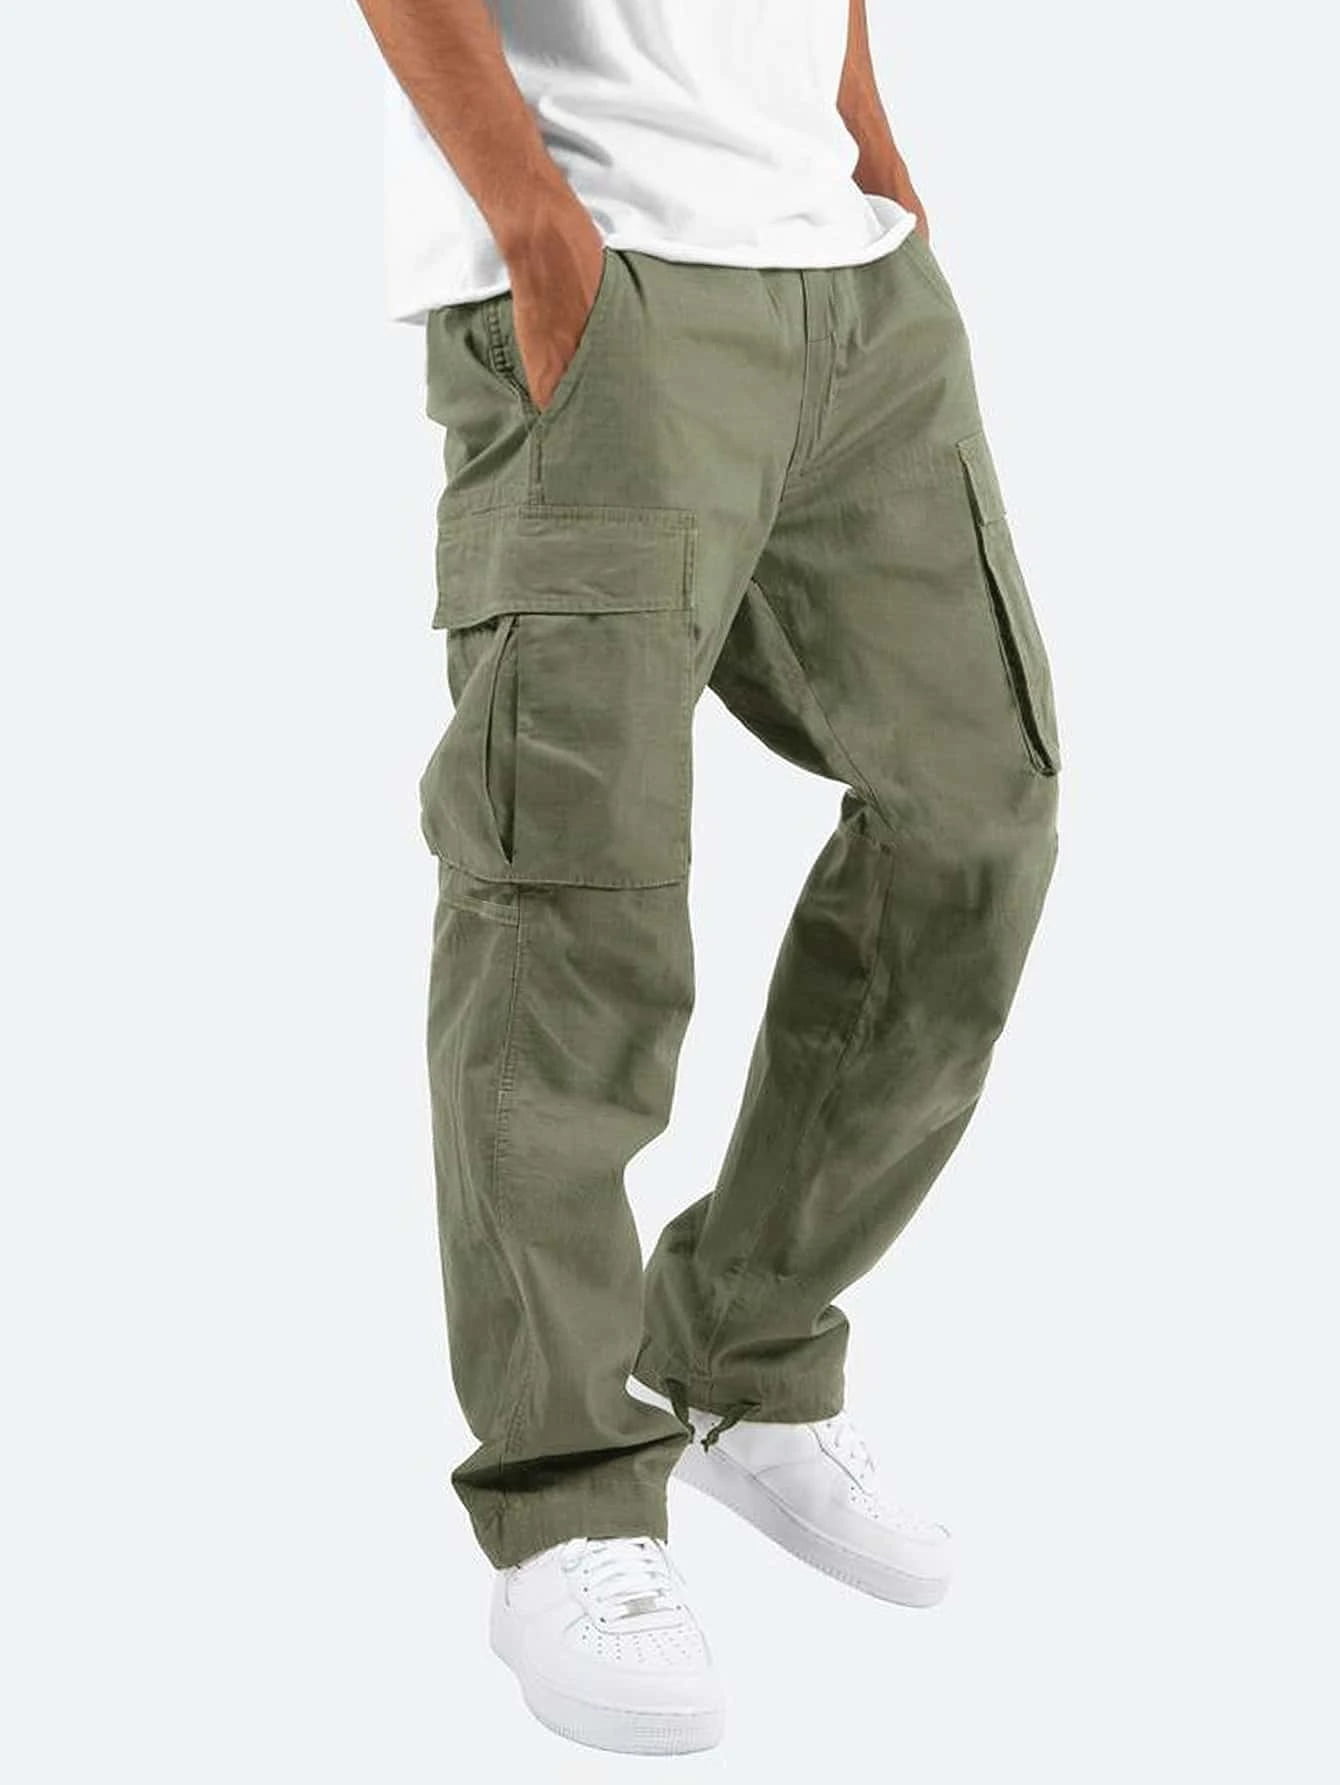 Men's Casual Cargo Pants with 8 Pockets Cotton Cargo Work Pants(No Belt) |  SHEIN USA